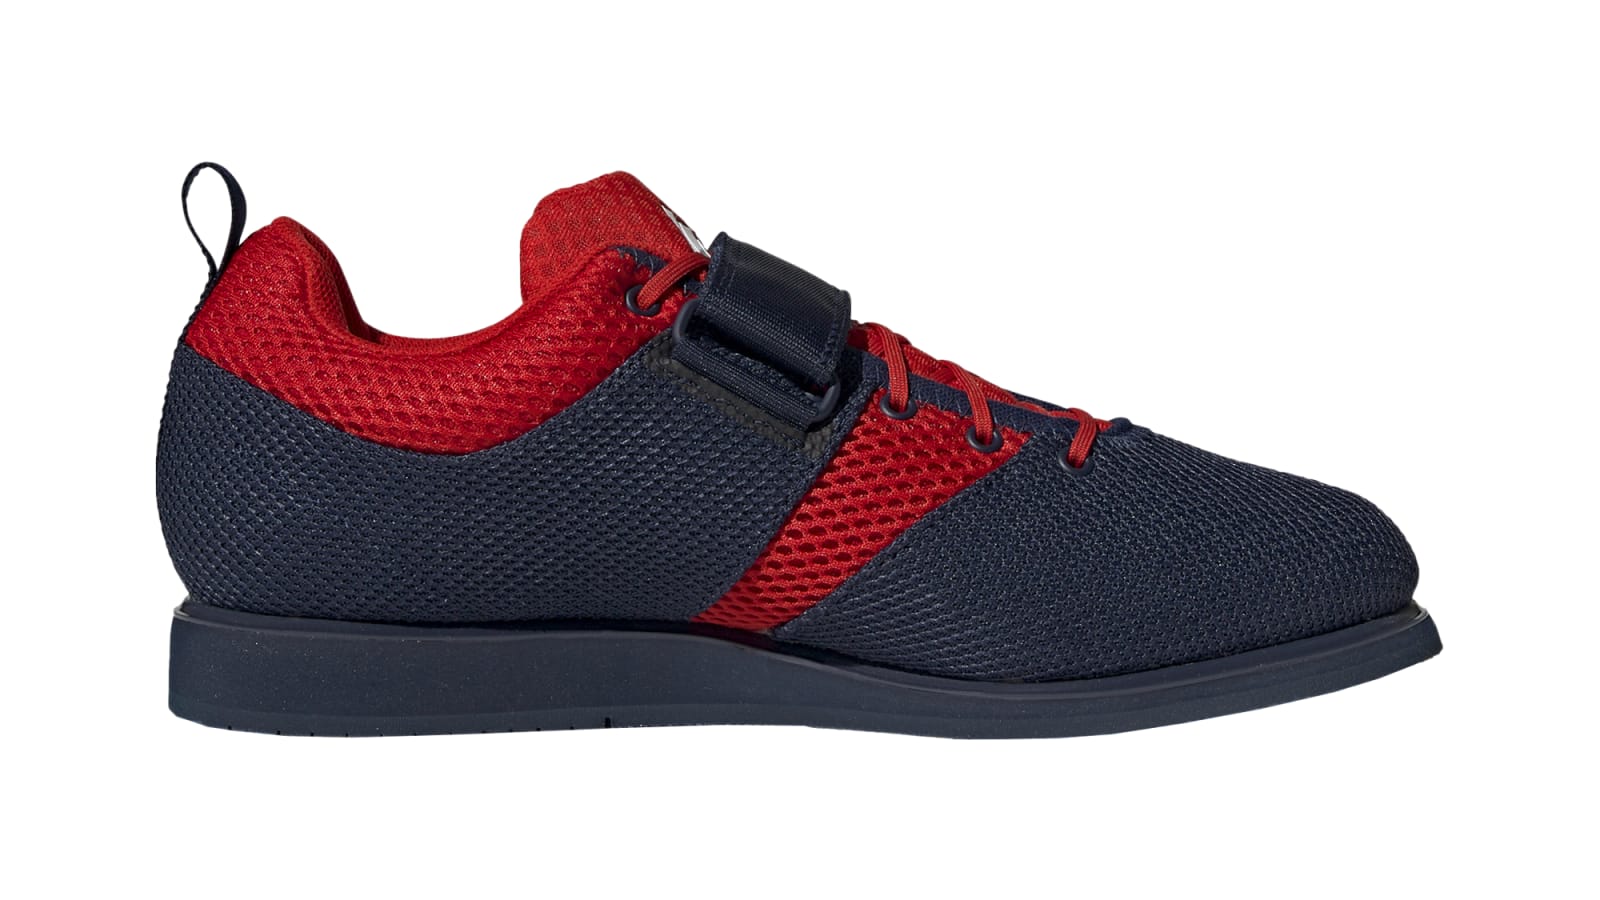 Adidas Powerlift 5 Weightlifting Shoes - Team Navy Blue 2 / FTWR White /  Better Scarlet | Rogue Fitness Canada